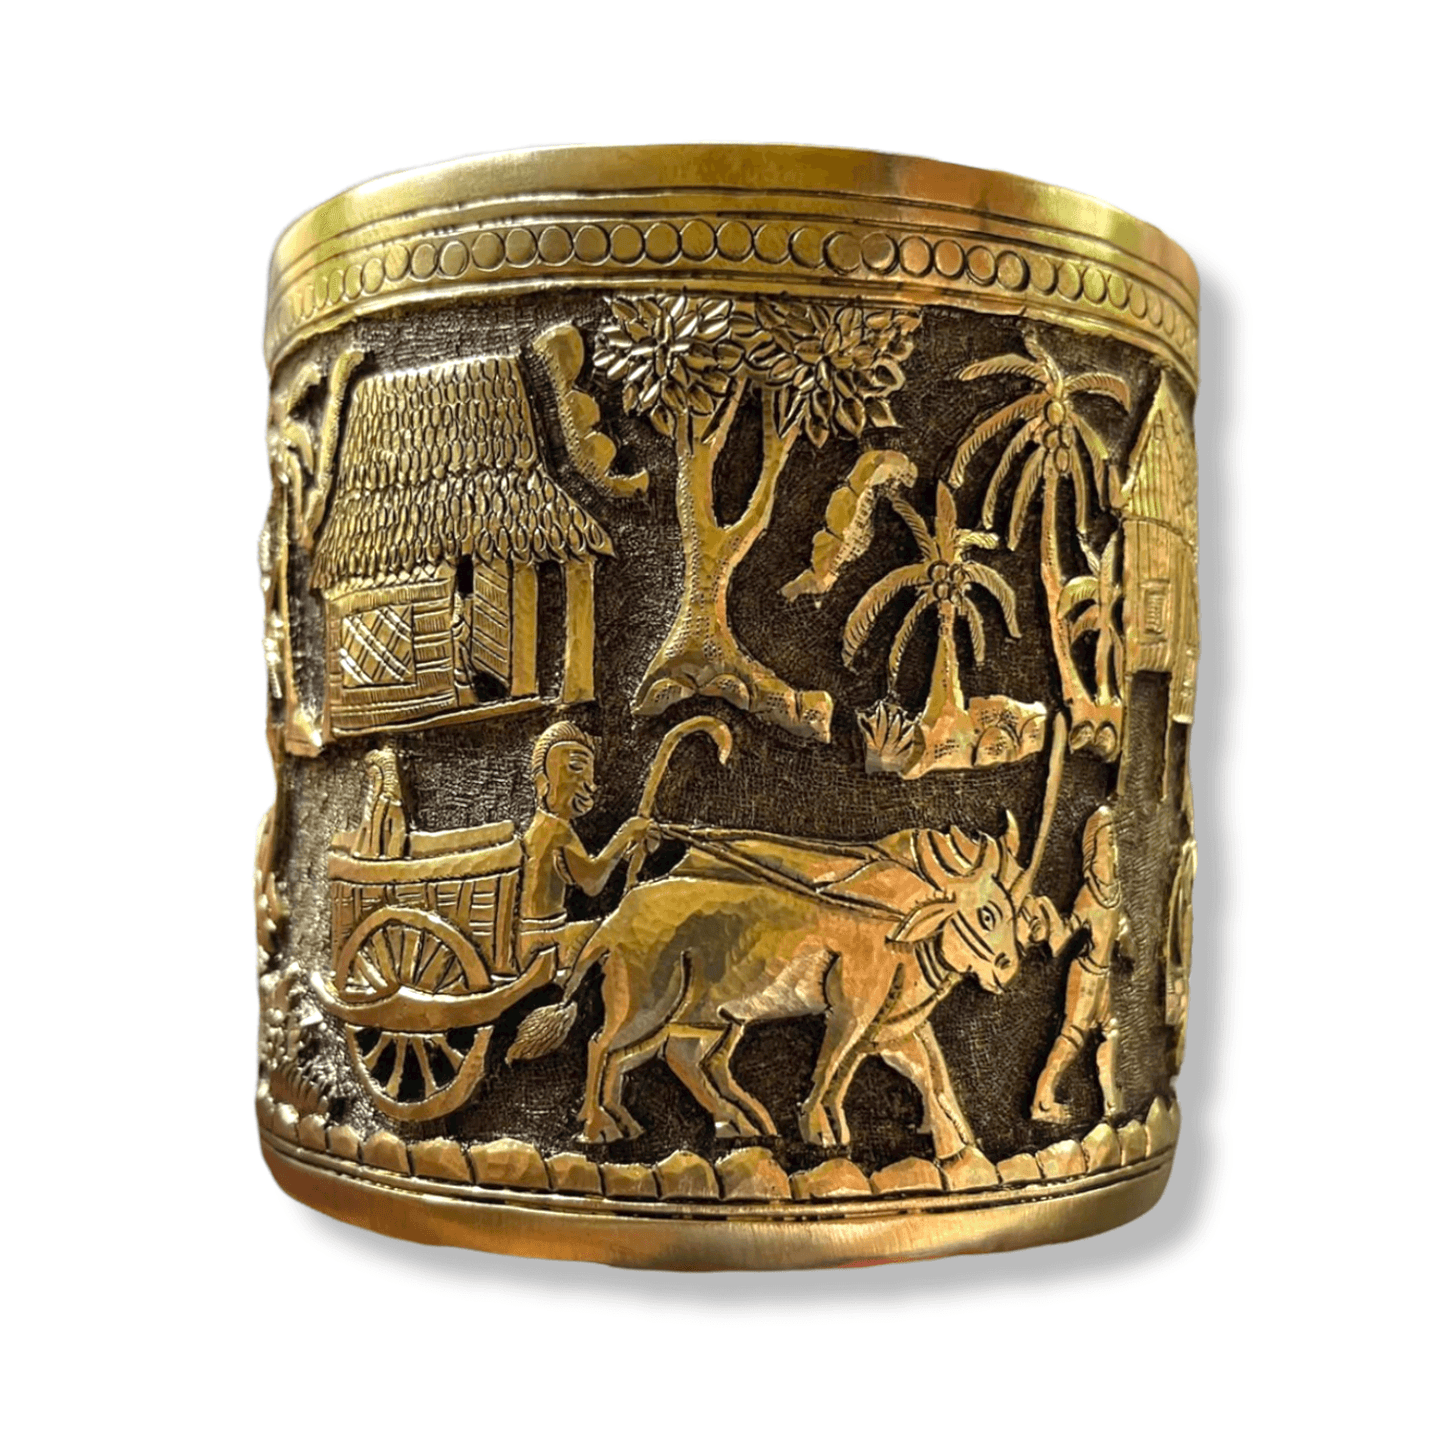 Hand Engraved Solid Brass Mug with Handle - Khmer Rural Hand Engraved Solid Brass Mug with Handle - Khmer Rural 